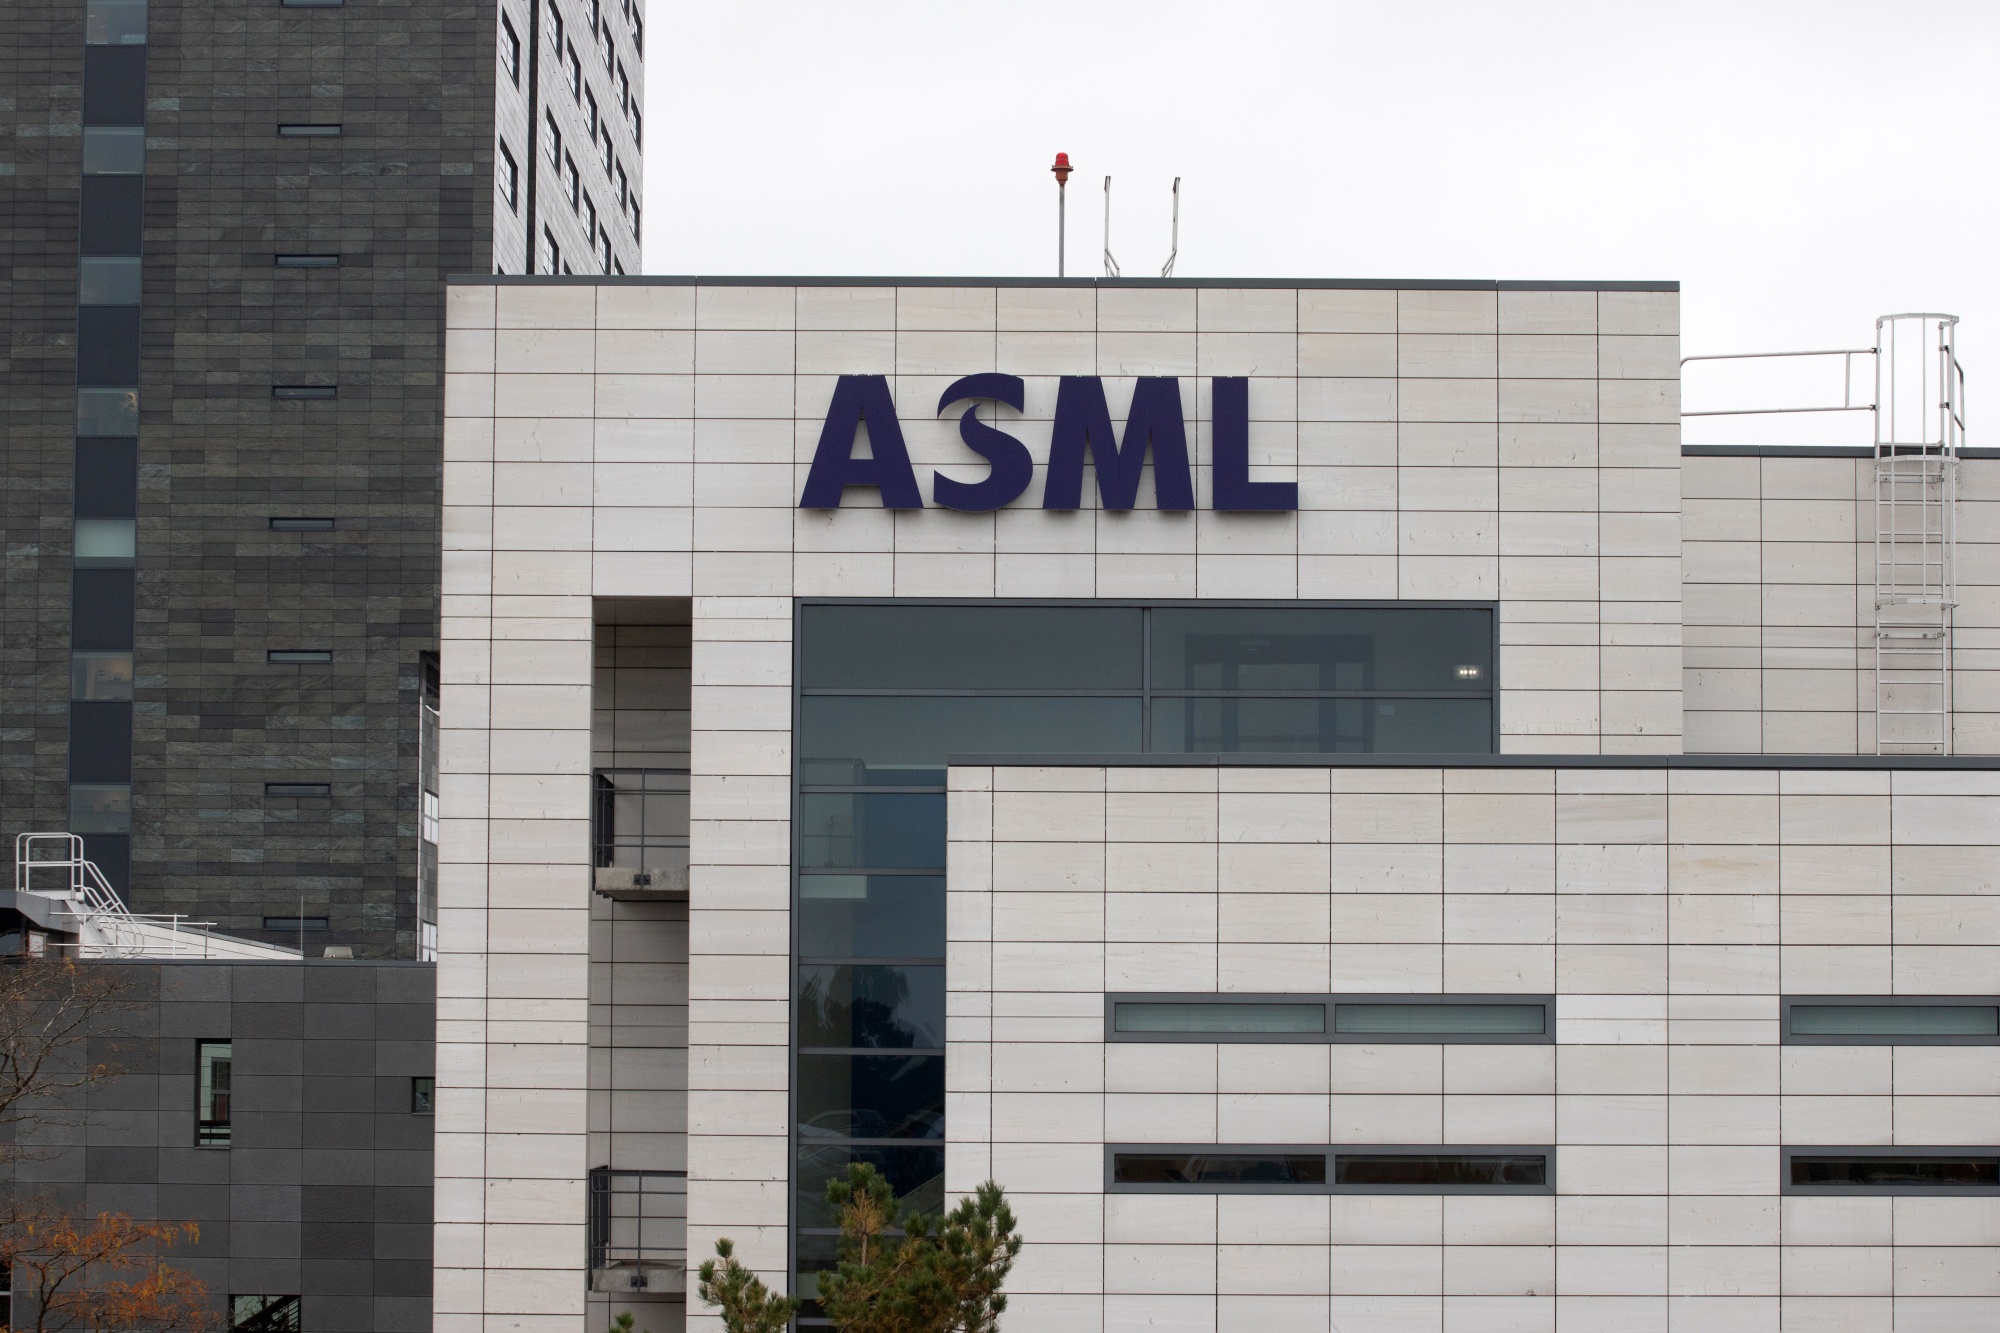 ASML Hit With More Dutch Restrictions on China Chip Operations - Bloomberg